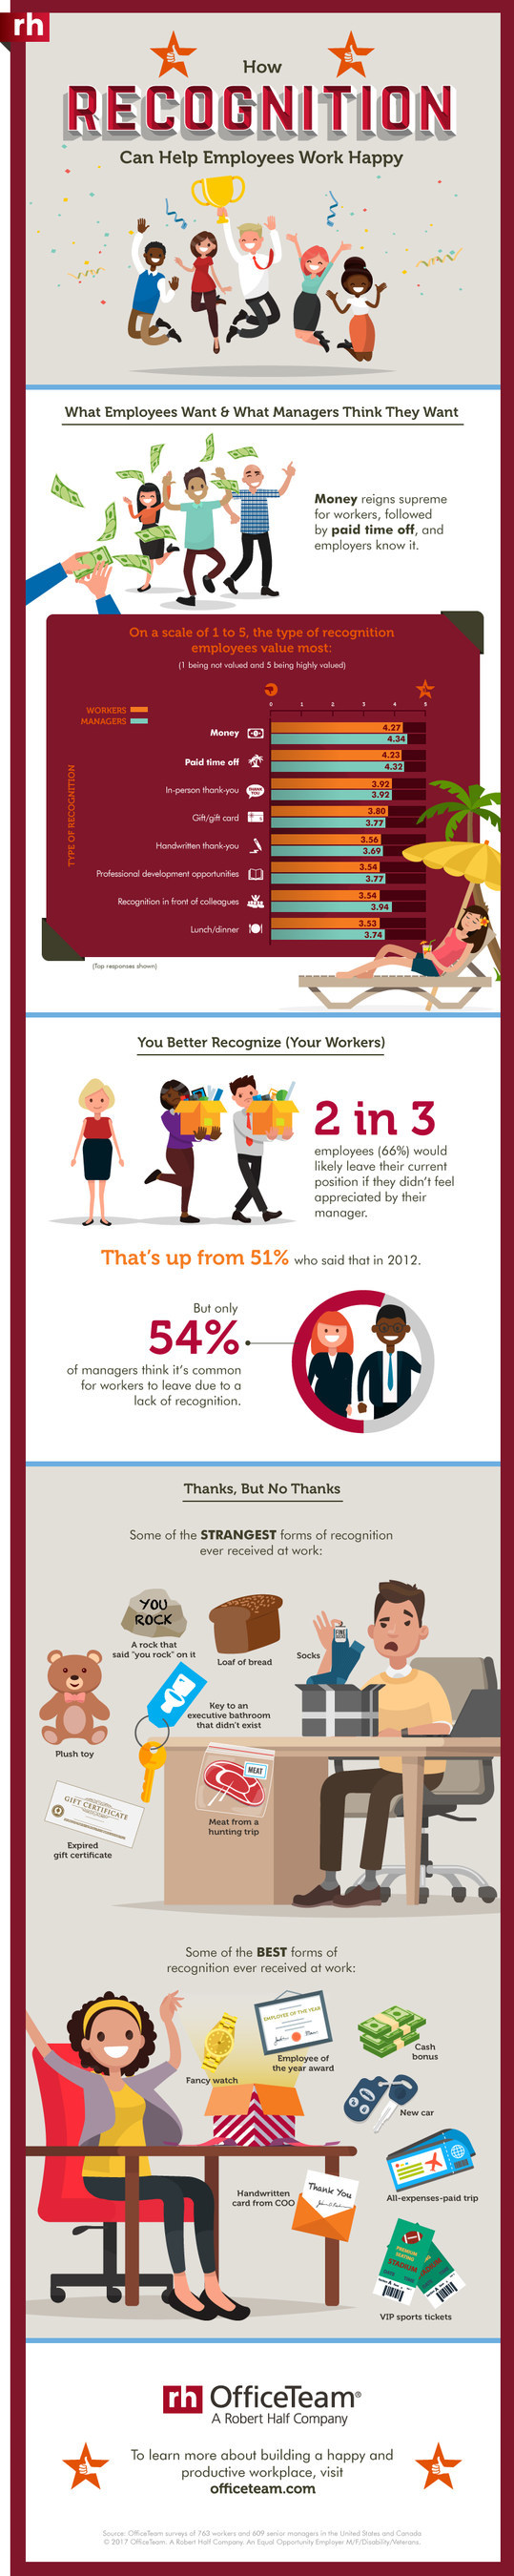 According to a new OfficeTeam survey, two-thirds (66%) of workers would leave their job if they didn't feel appreciated. That's up from 51% who responded that way in 2012. But just over half (54%) of senior managers believe it's common for staff to quit due to lack of recognition. Check out the infographic for additional stats.